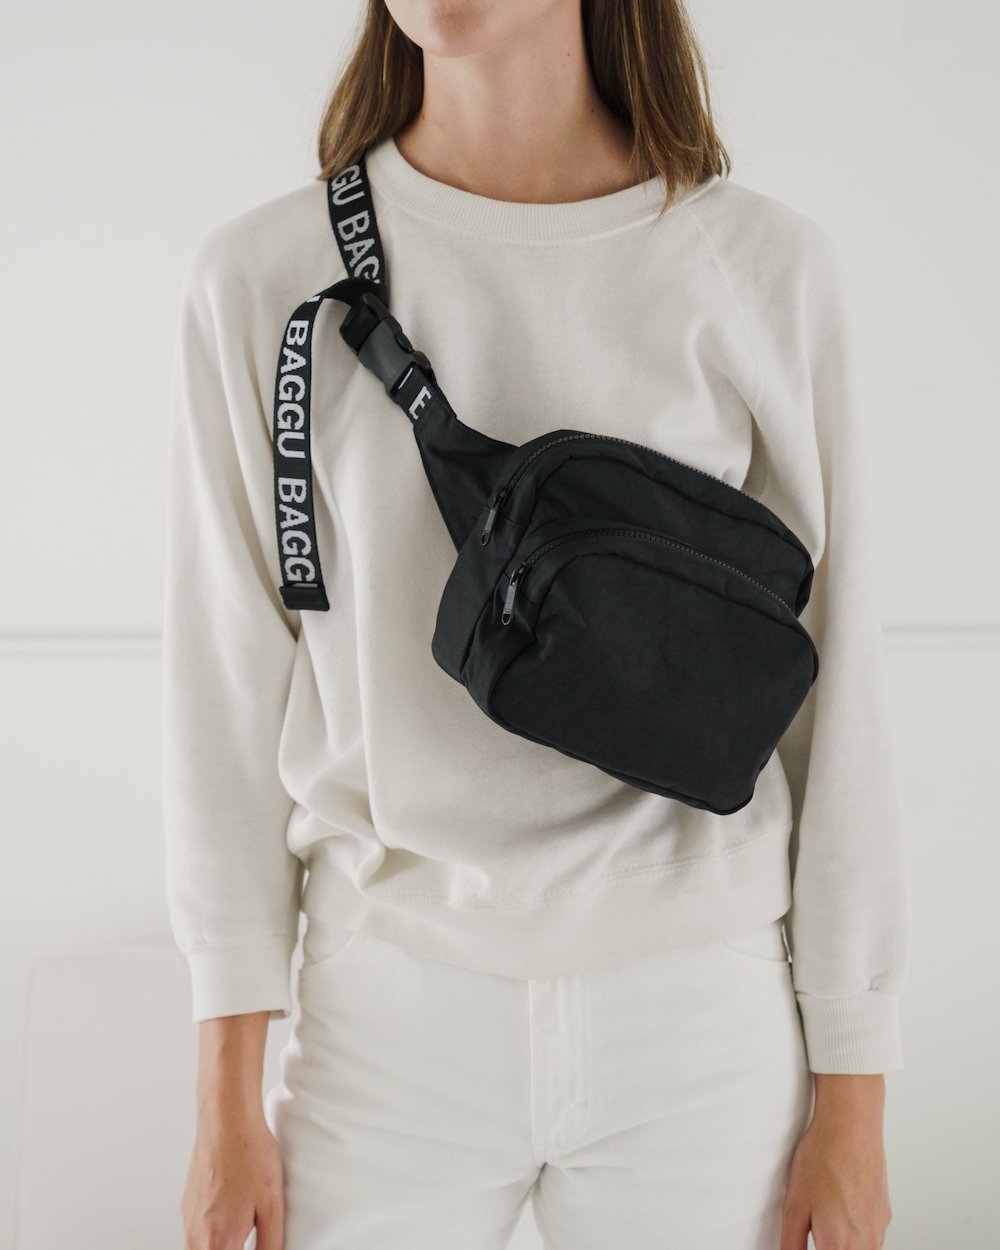 Fanny Packs We've Got Our Eyes On for - Styles